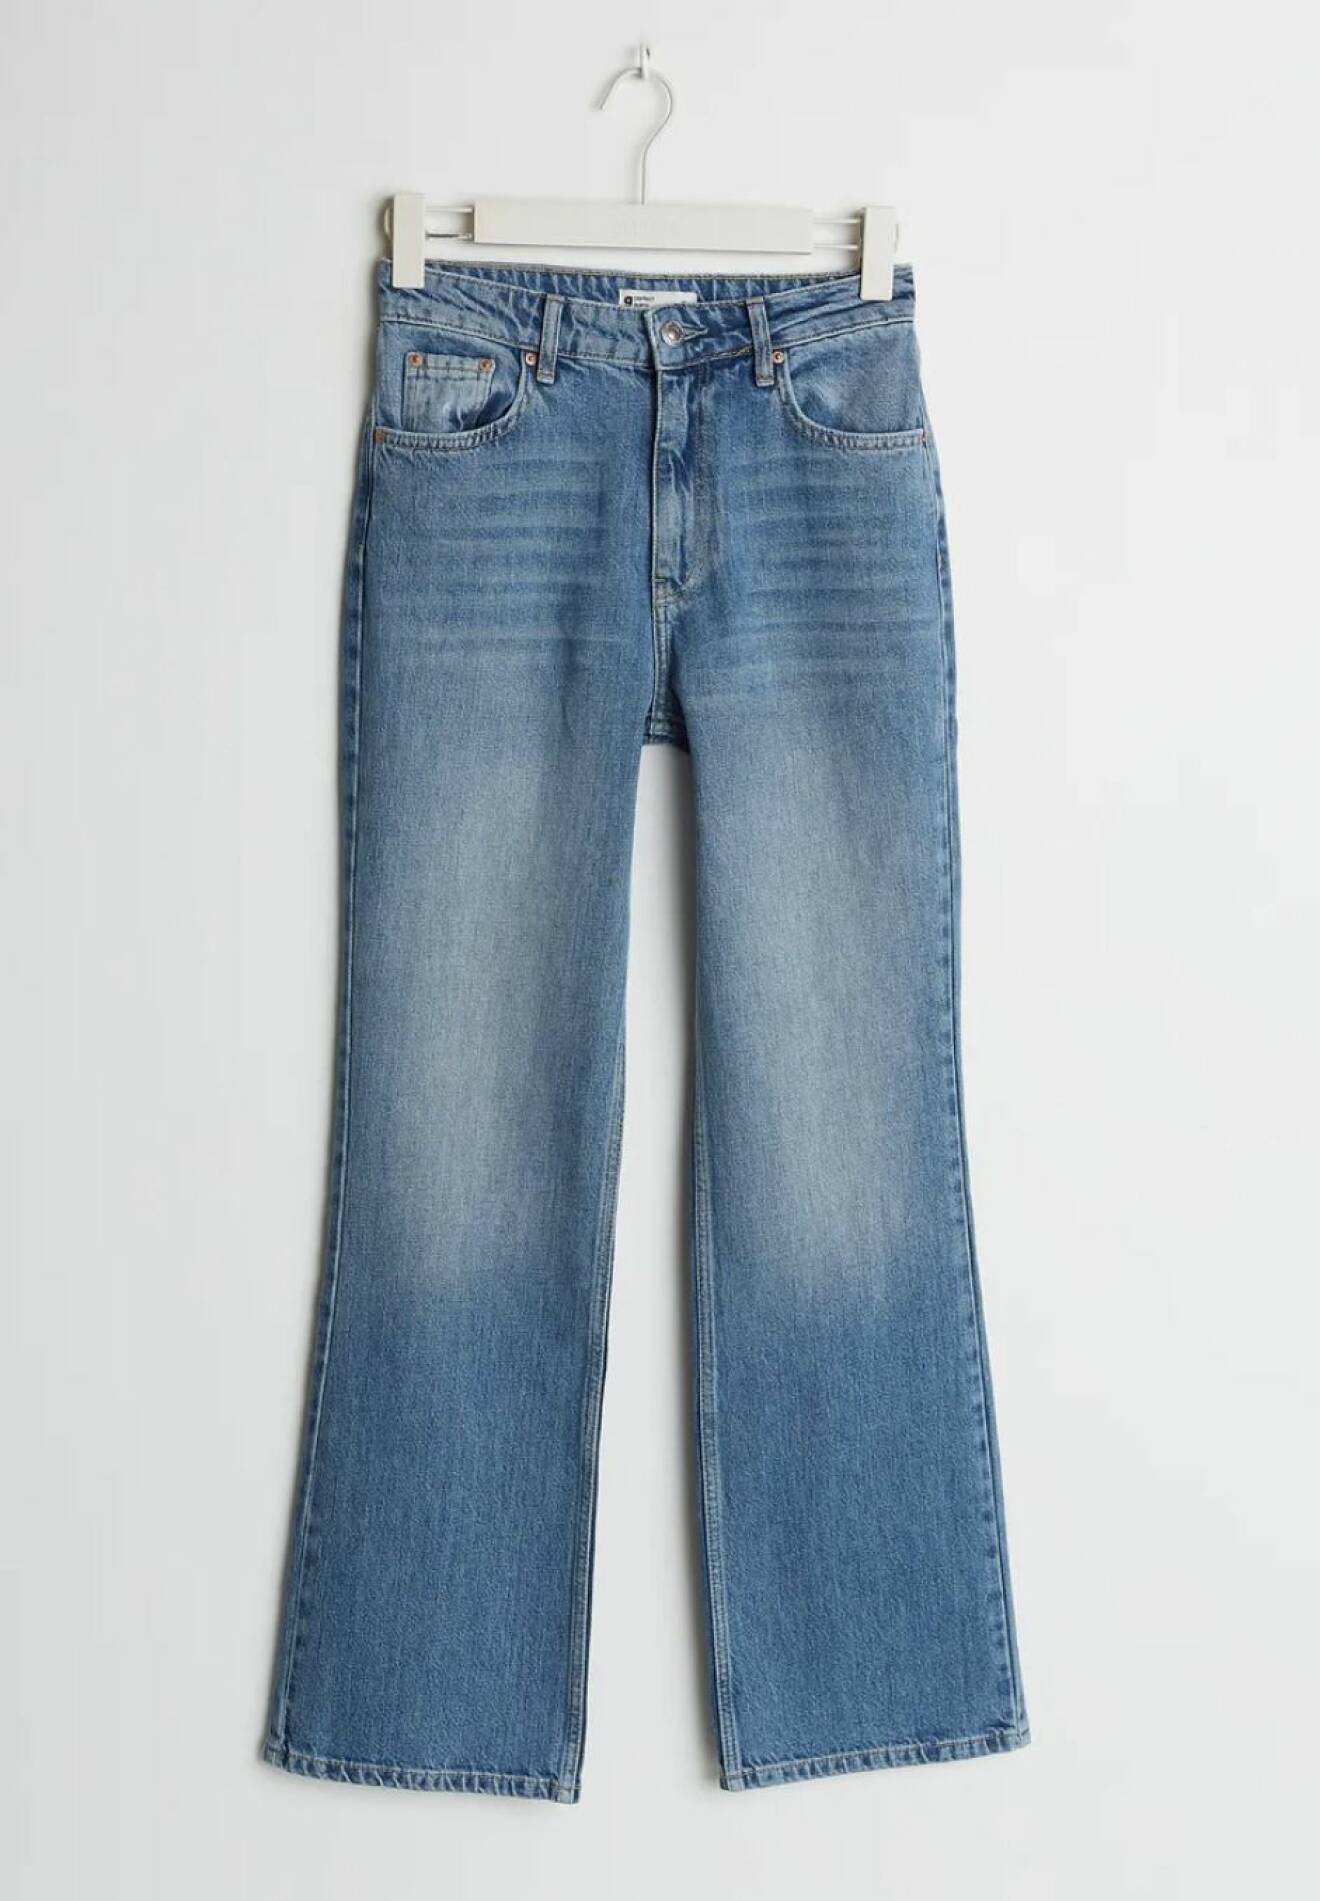 jeans gina tricot